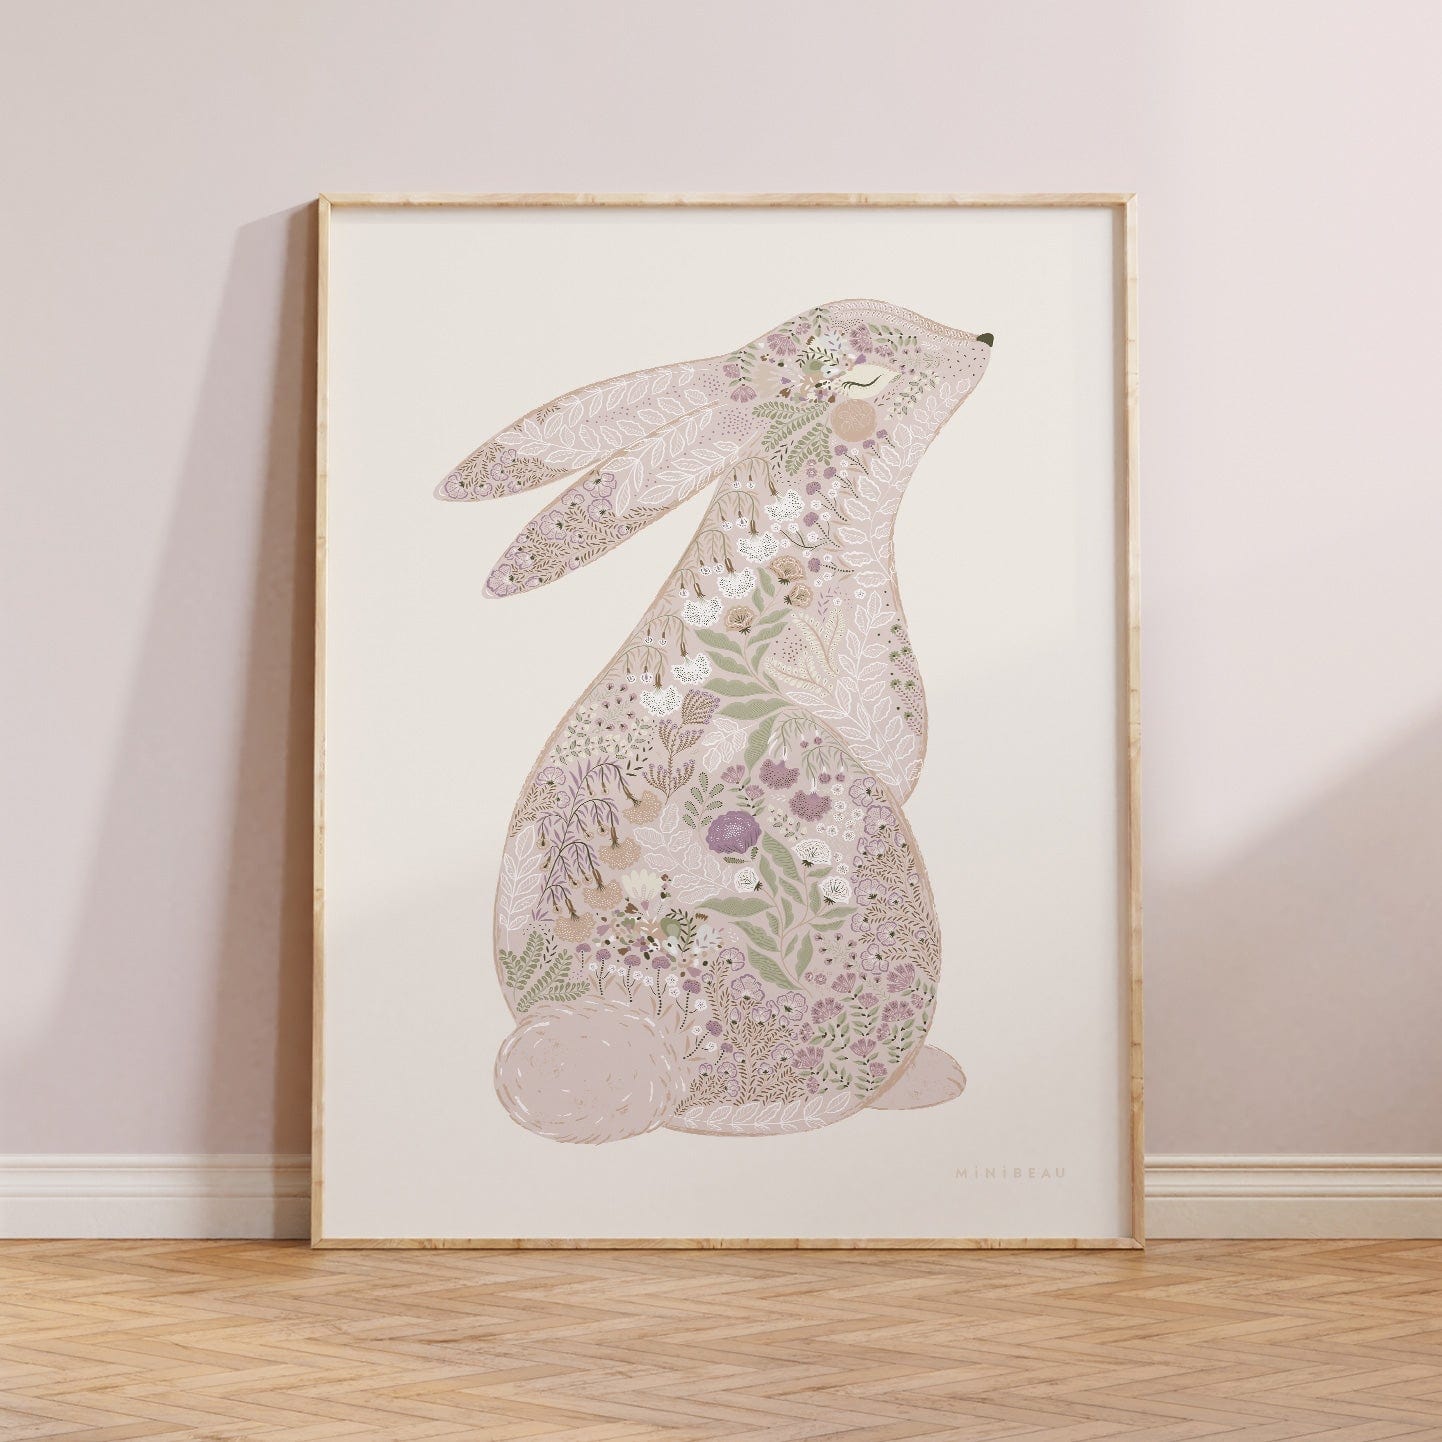 Photo showing our Floral Bunny Art Print in Pink in a light wood frame leaning against a neutral wall on a parquet flooring. Our Floral Bunny Art Print in Pink features a cute bunny sitting up with its back facing out so we can see it's tail, and it's head slightly turned towards the front so it's eye and nose can be seen. The Bunny has been drawn with ornate blooms and foliage filling it in, in Pinks and greens, on a neutral background.